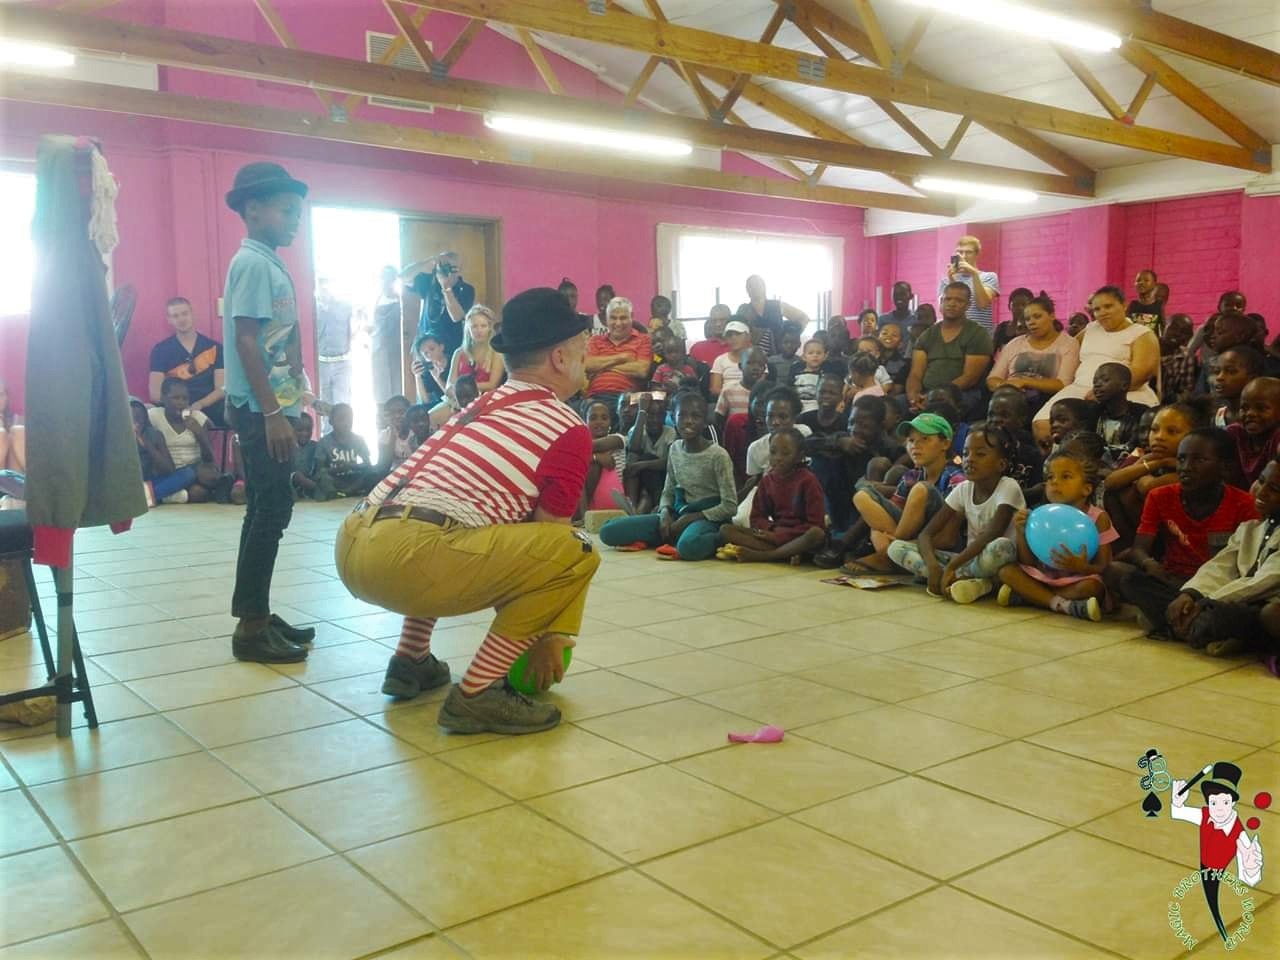 Children of Home of Good Hope entertained with cheerful show